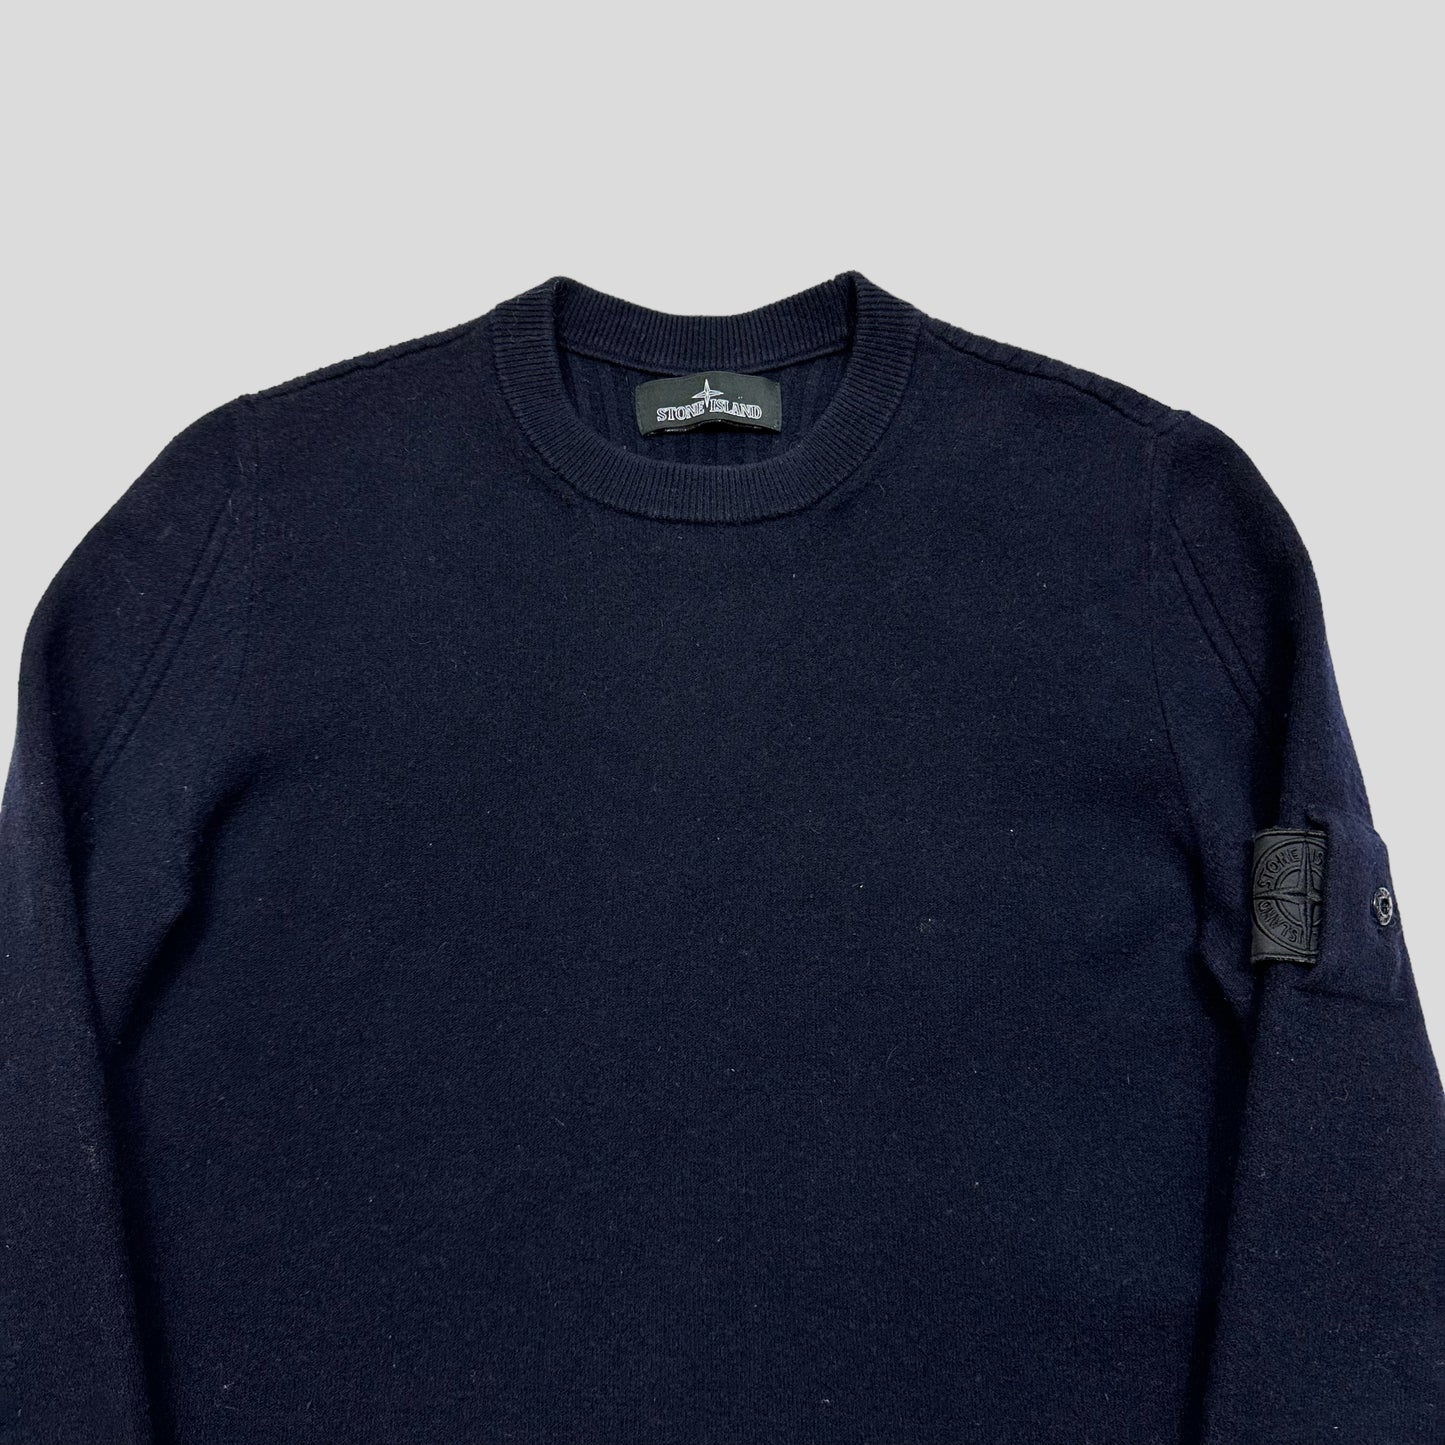 Stone Island Shadow Project Navy Knitted Crewneck - S/M